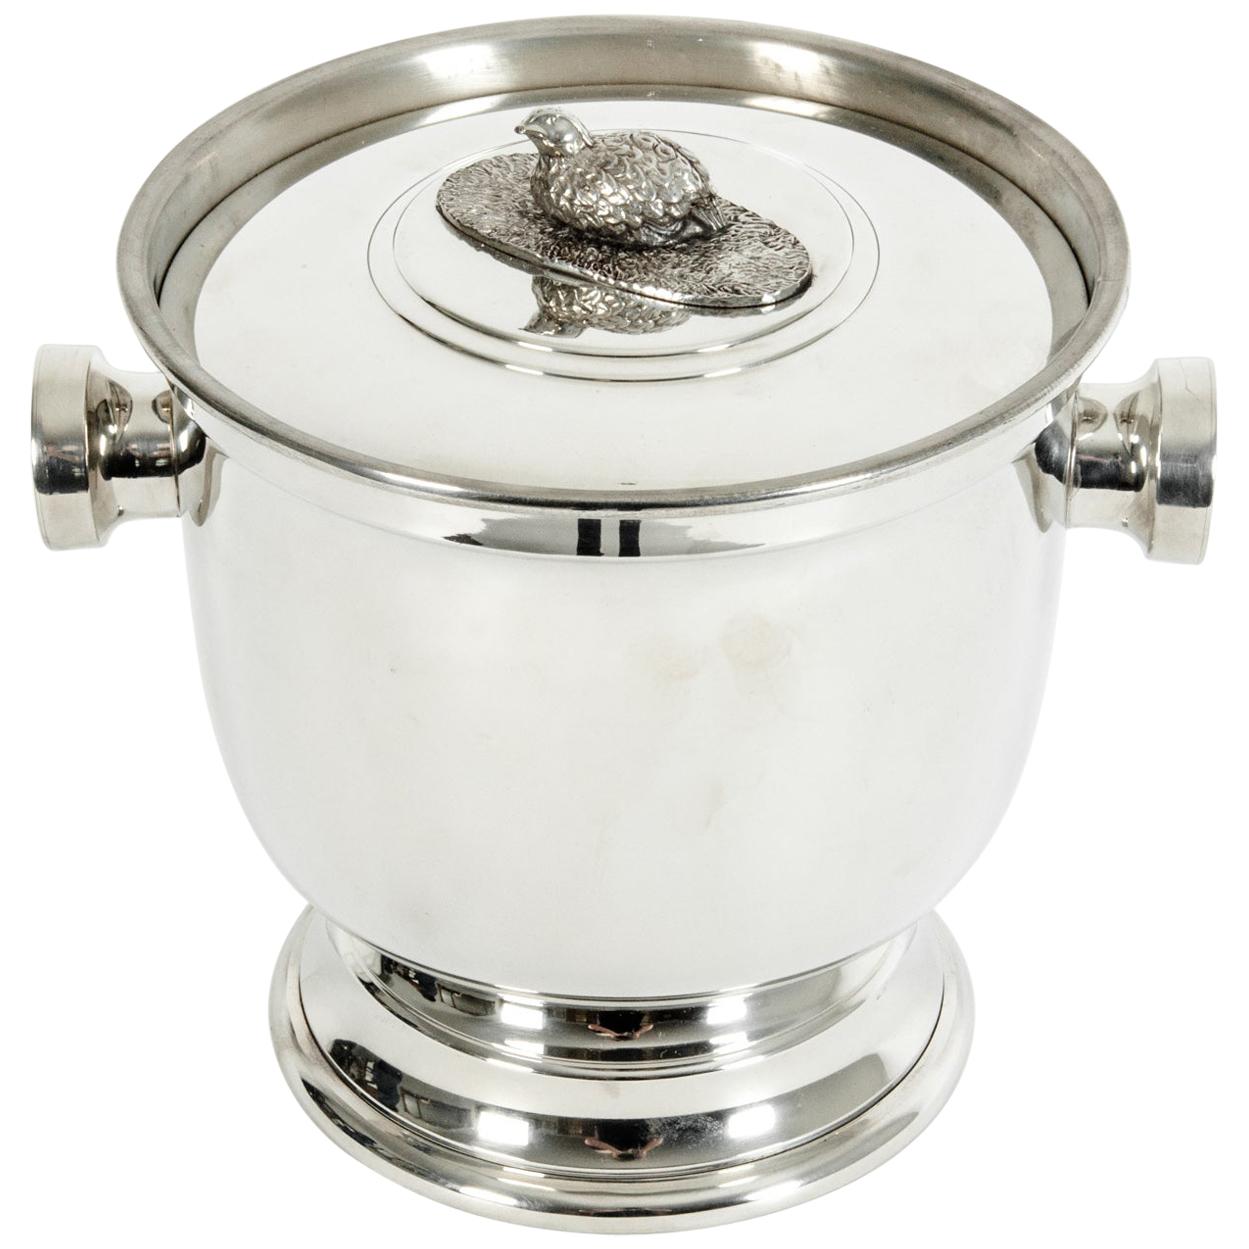 English Sheffield Barware Silver Plated Covered Ice Bucket